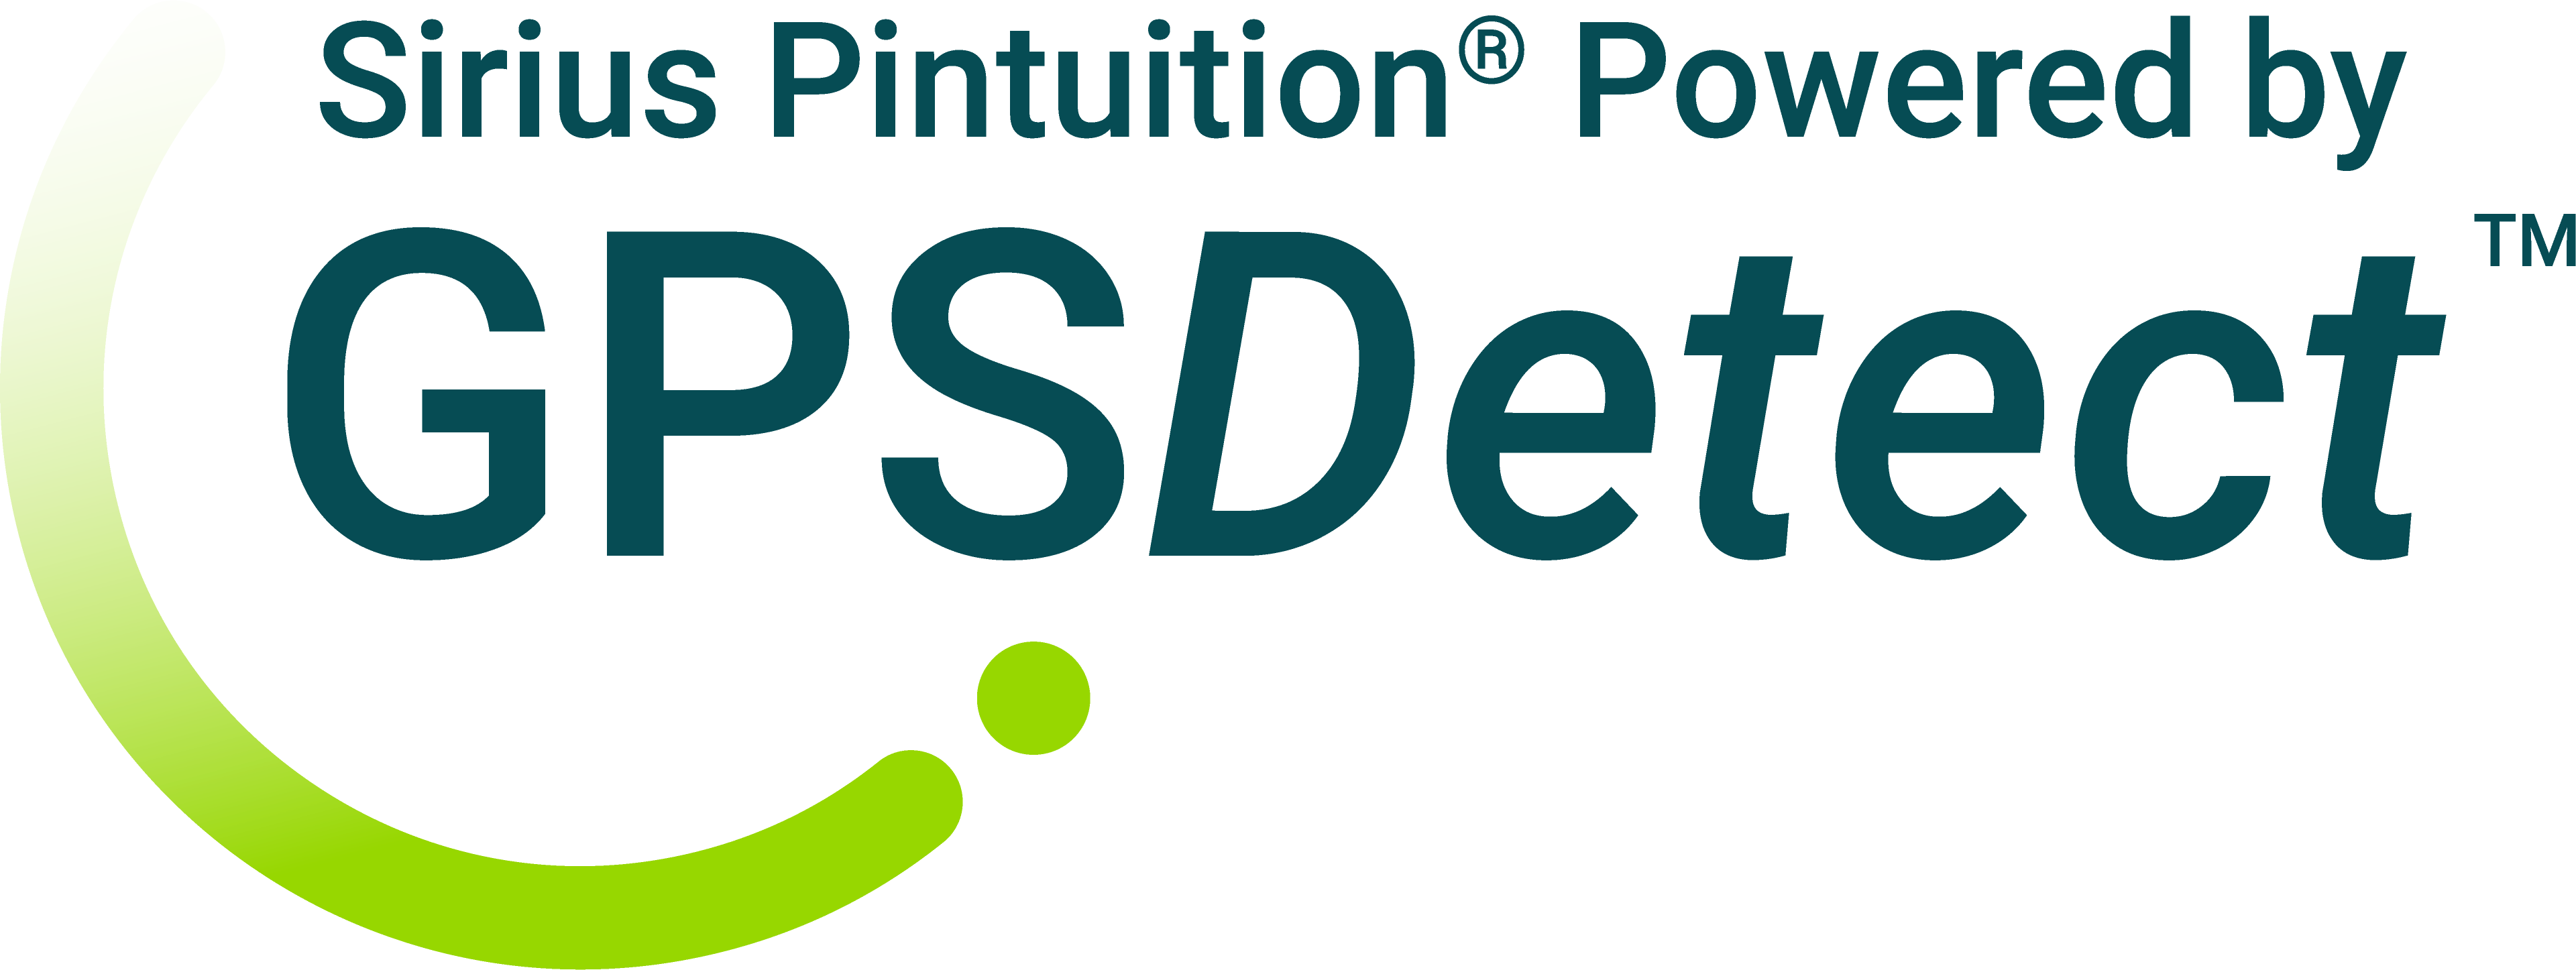 Sirius Pintuition® Powered by GPSDetect 